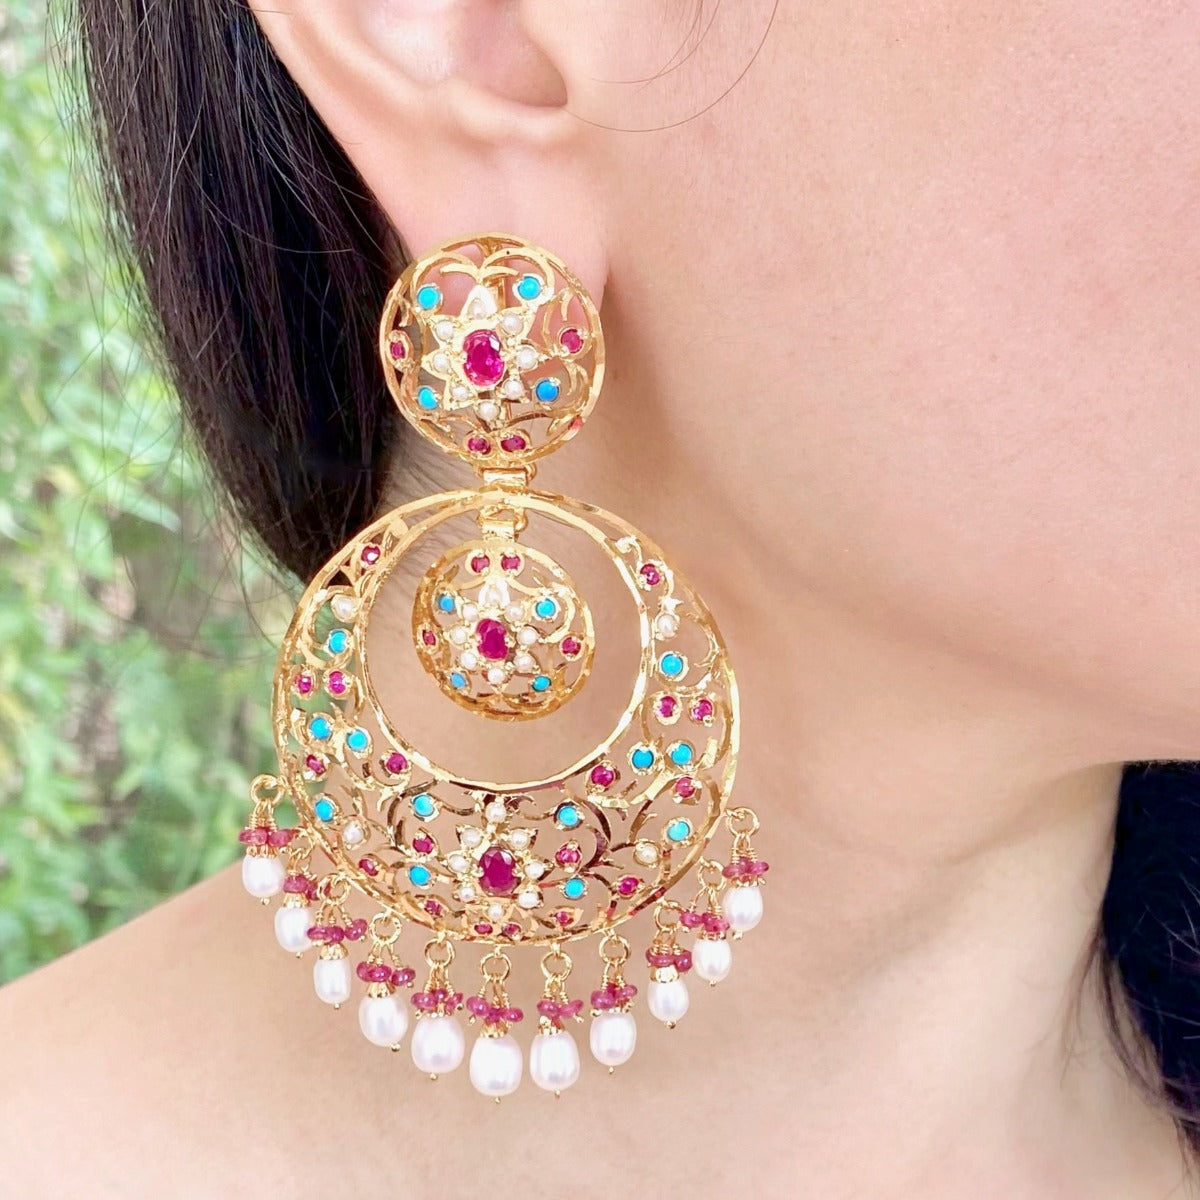 large chandbali earrings in sterling silver with gold plating